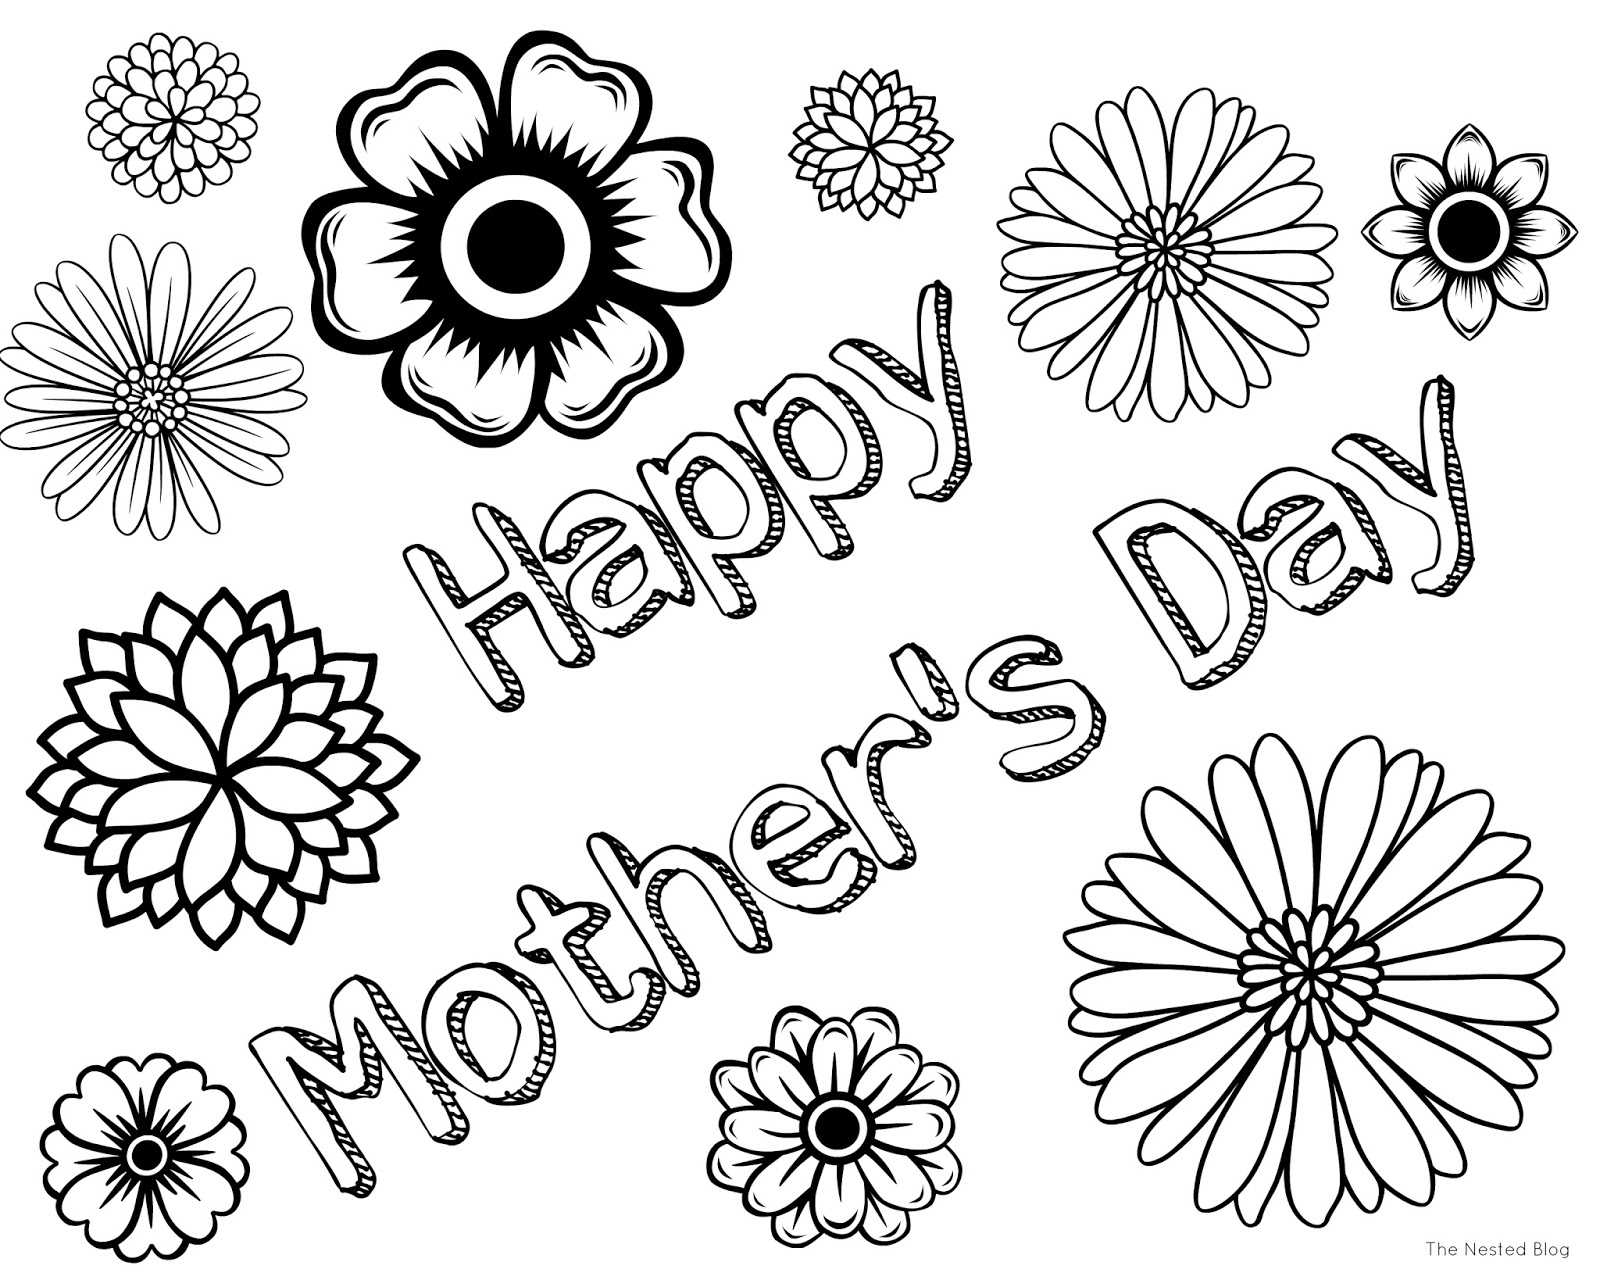 mother-s-day-2016-colouring-pages-for-kids-and-youngs-mothers-day-in-usa-quotes-and-images